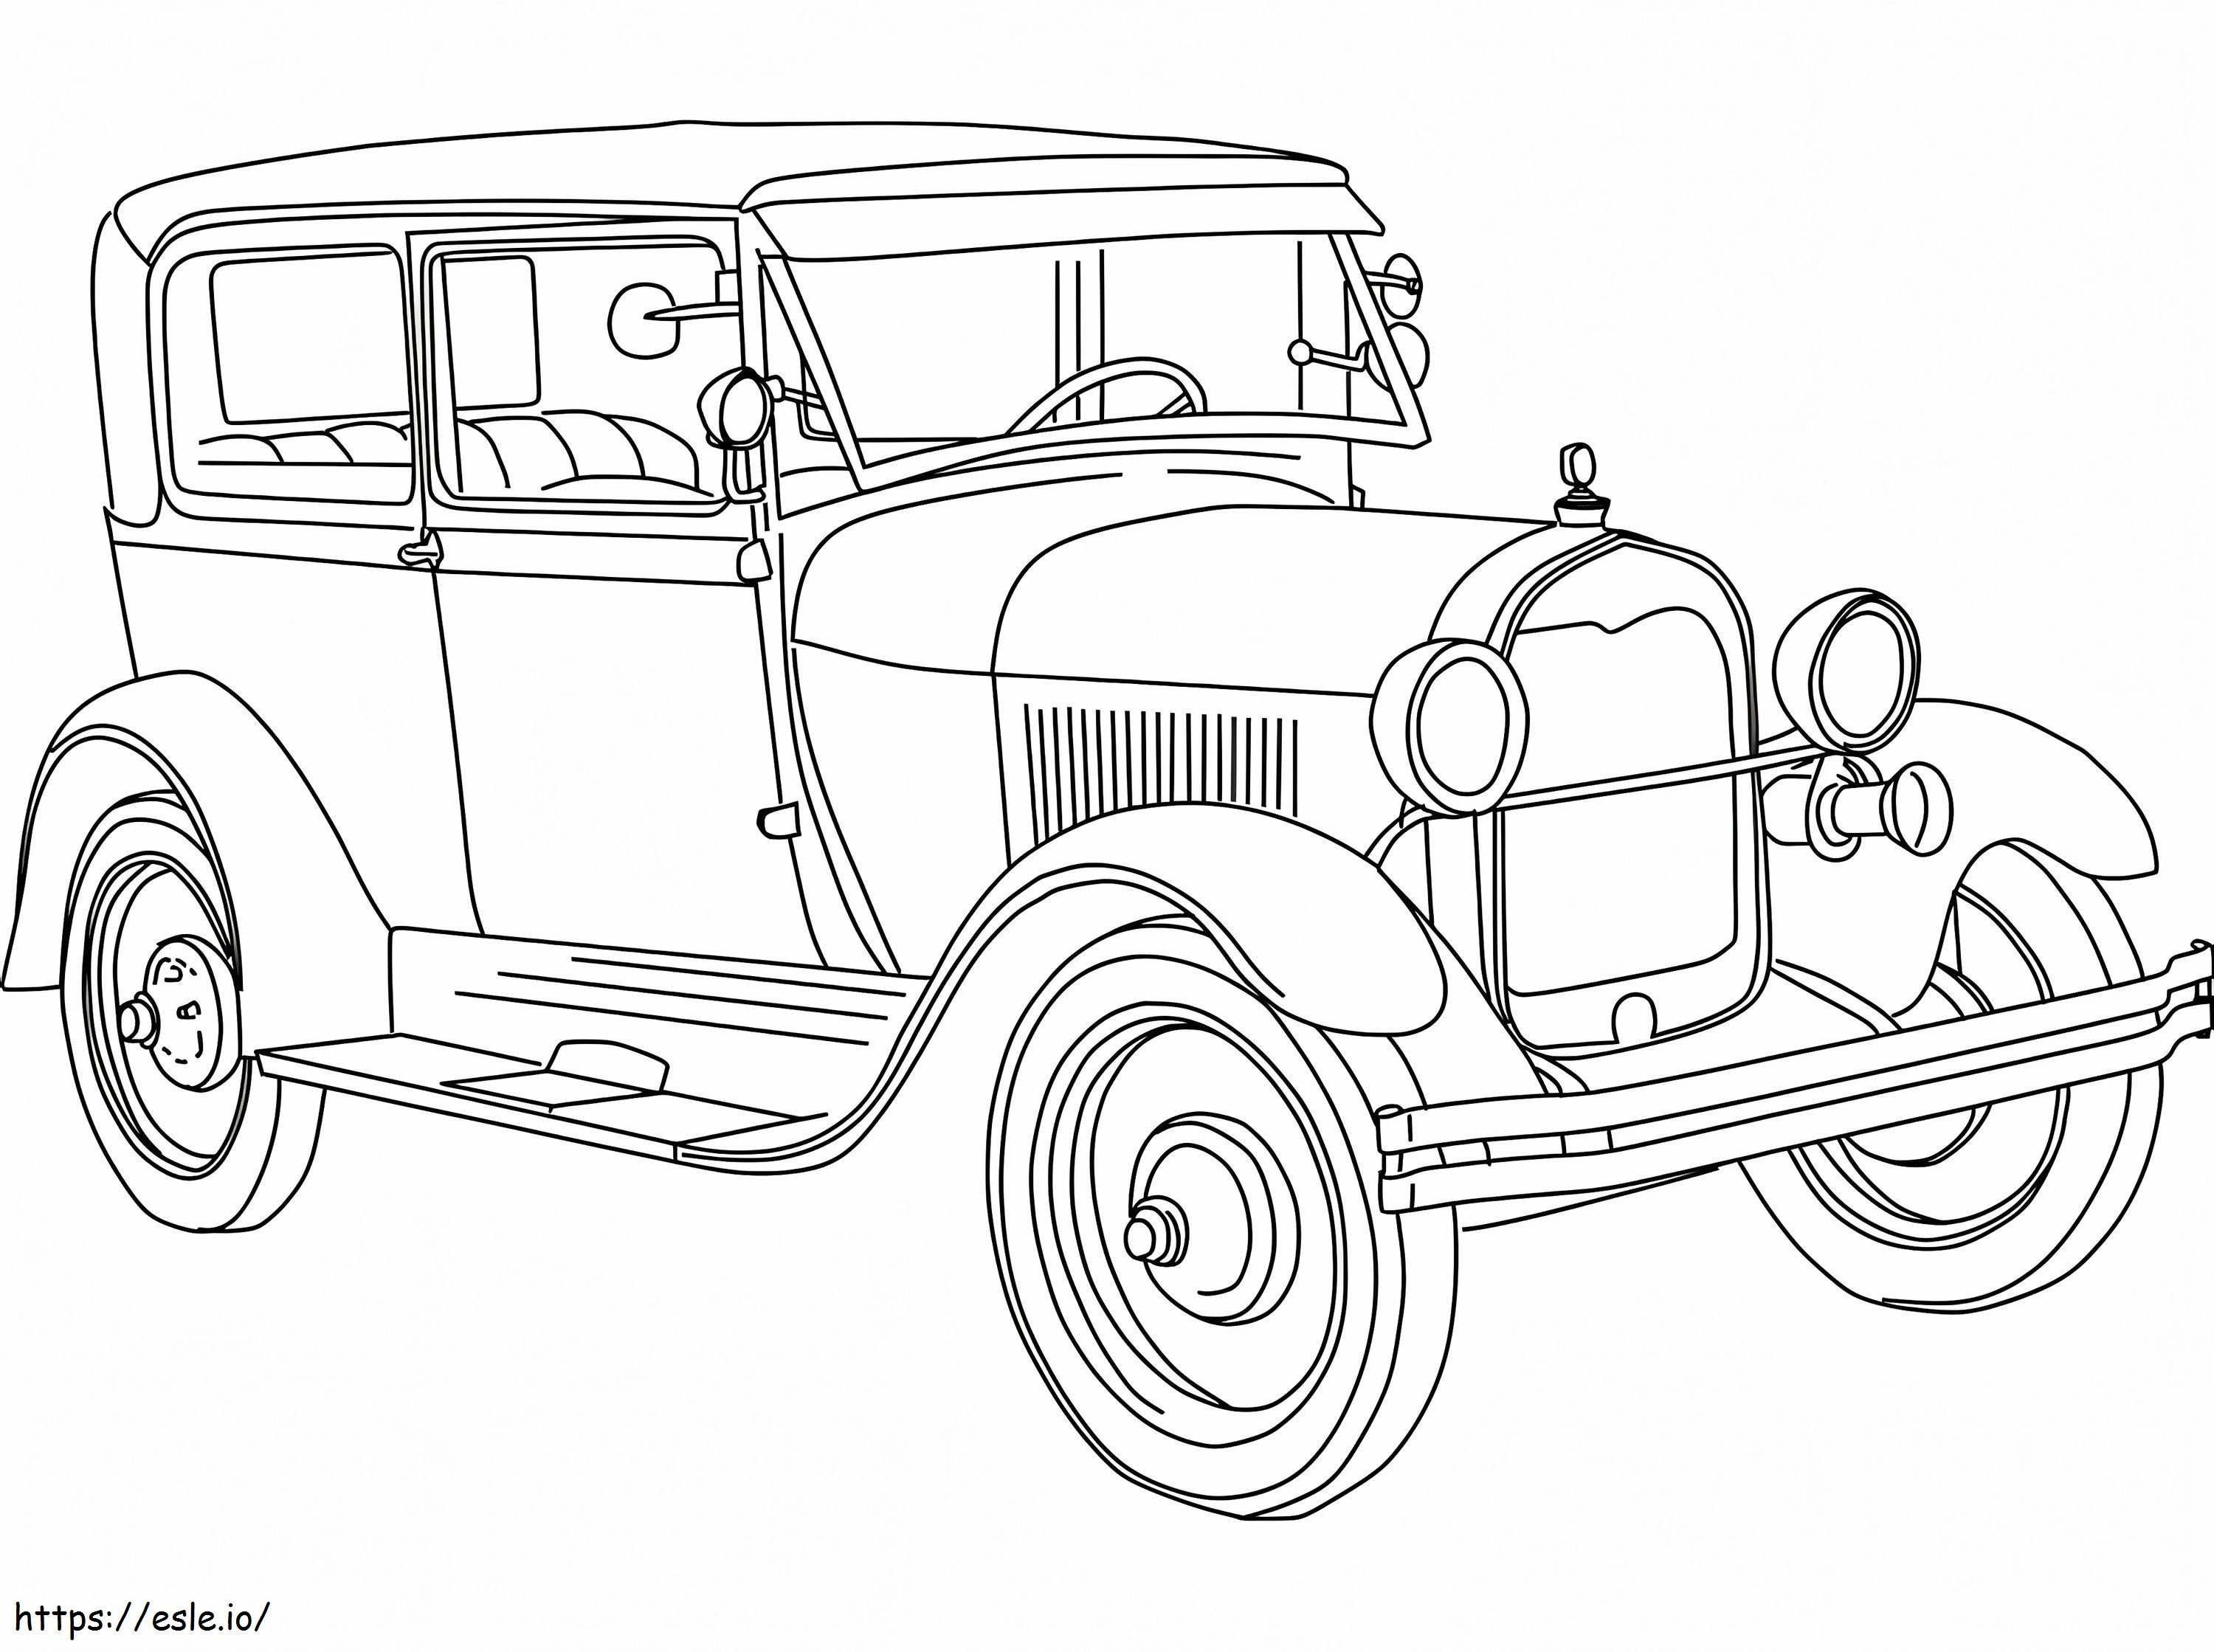 1928 Ford Model A coloring page